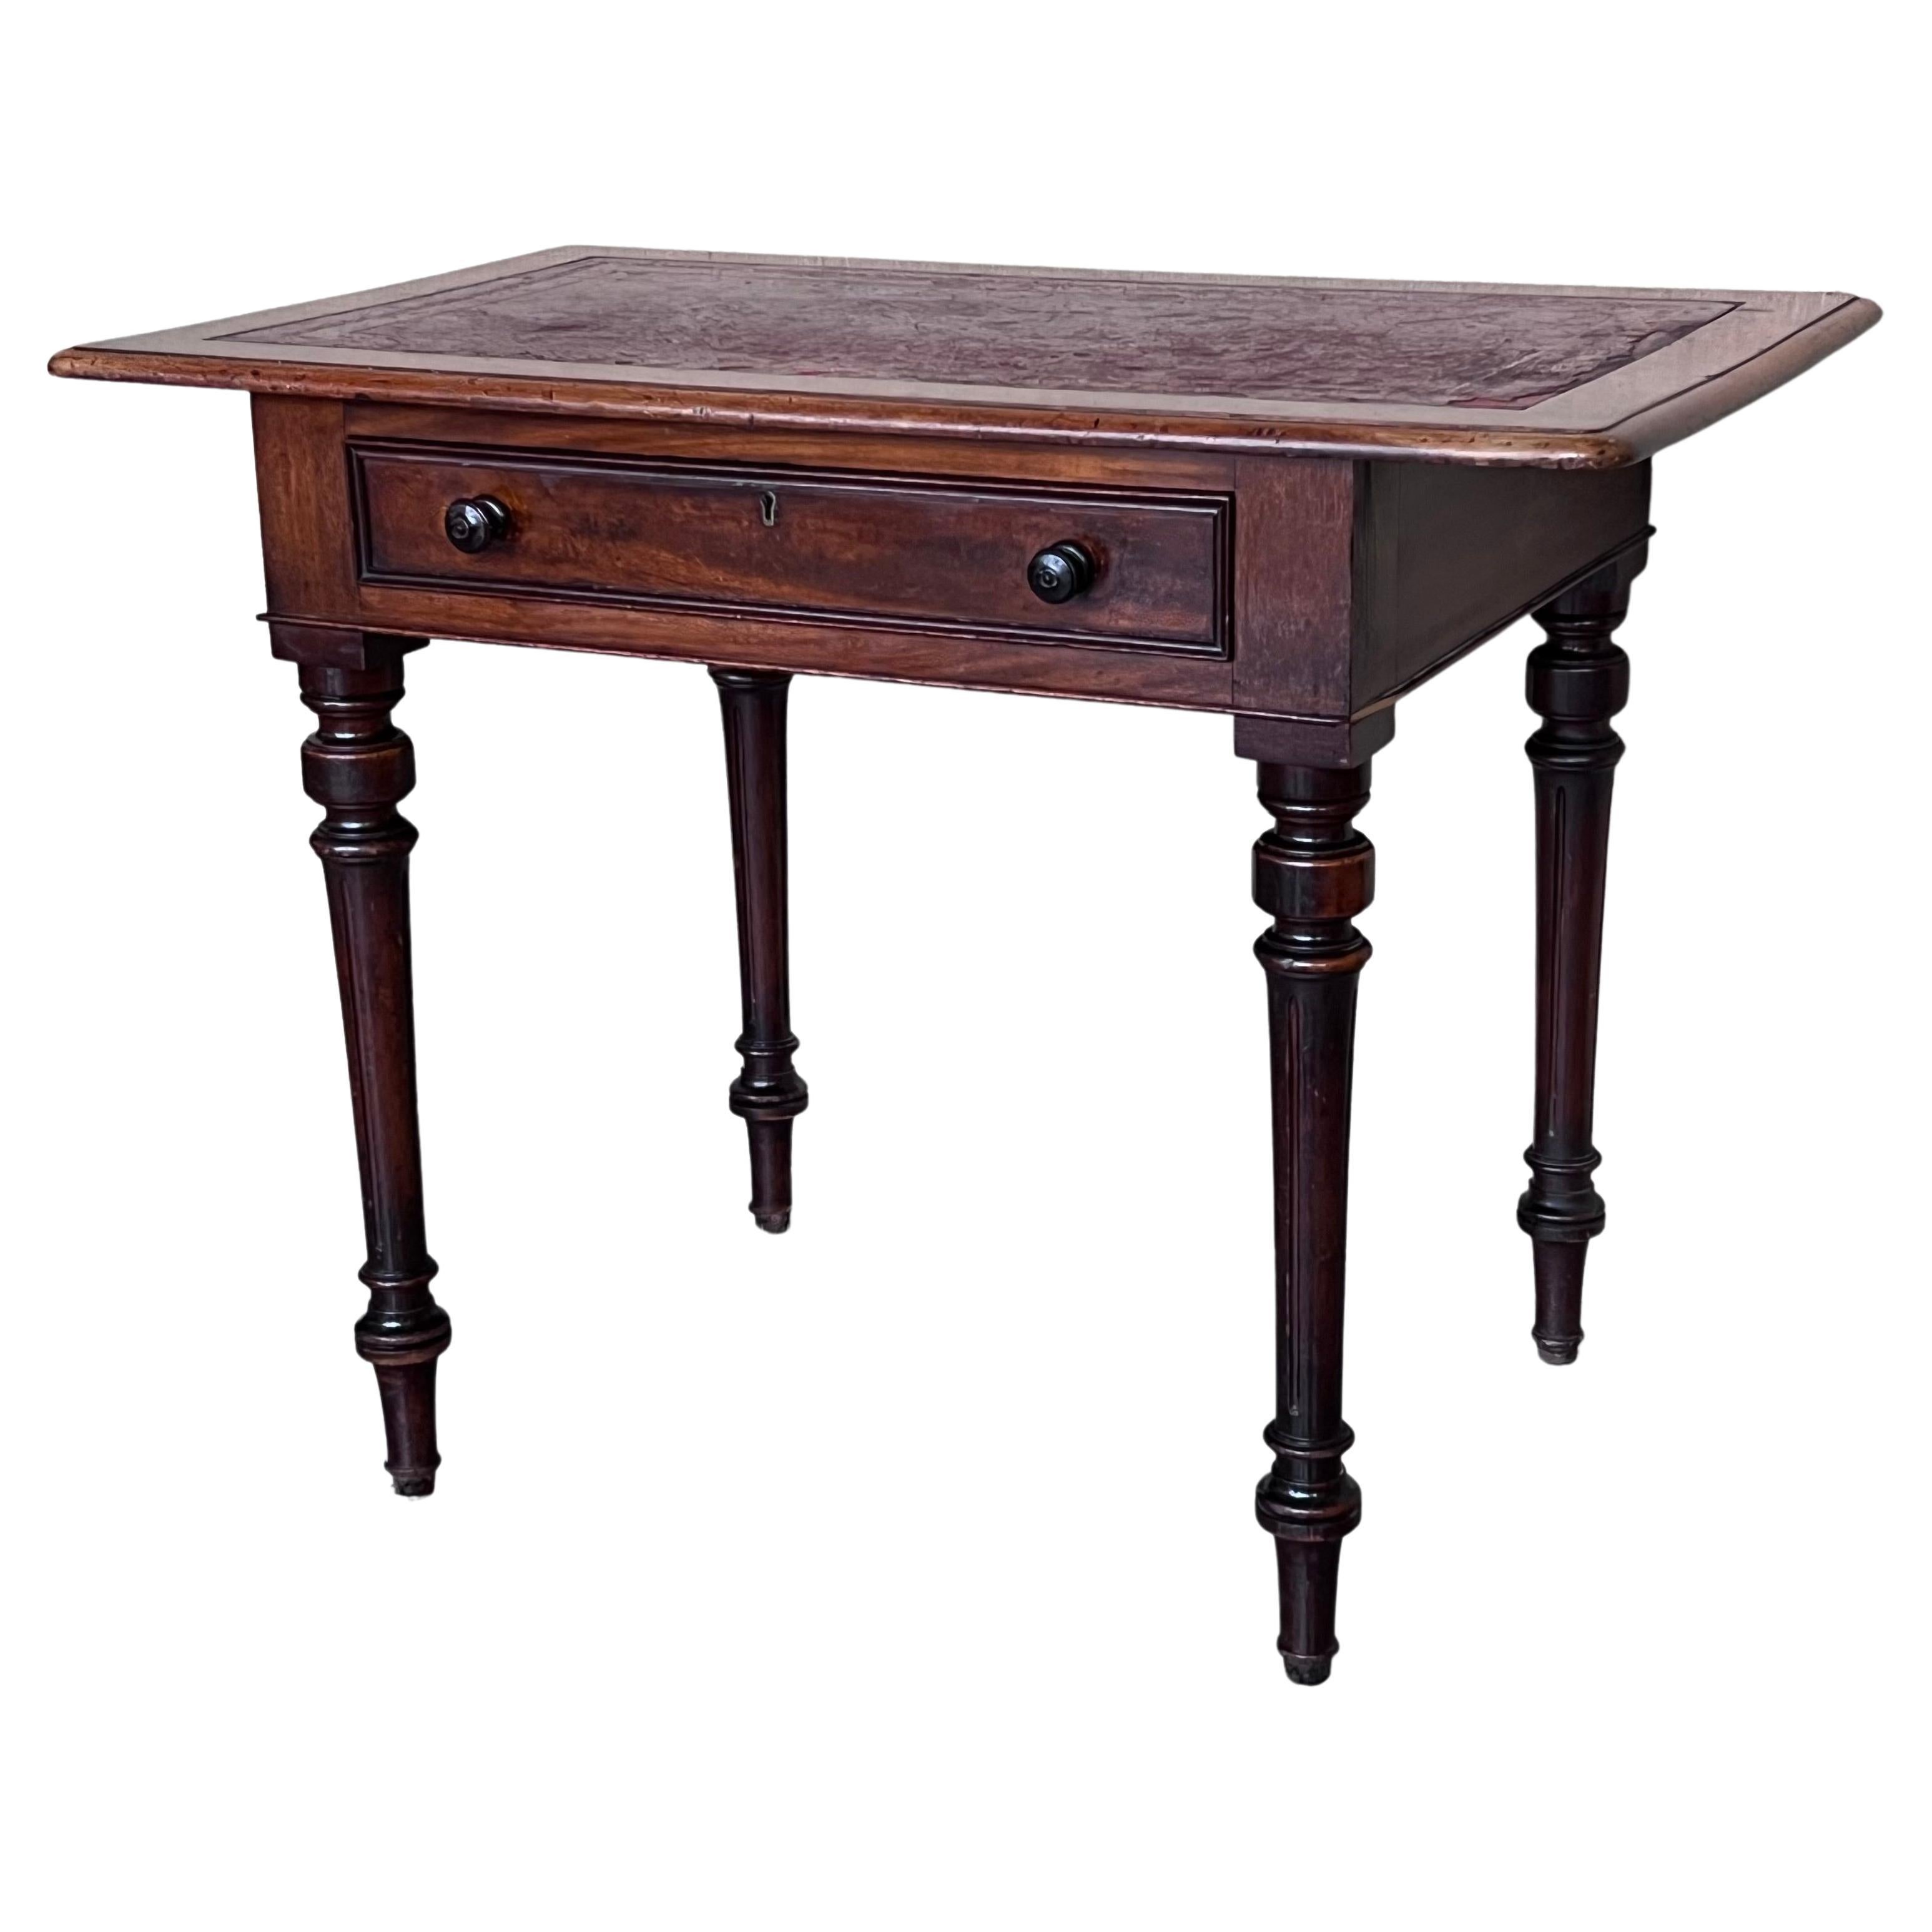 Spanish Country Pine Side Table with Two sides Drawer and leather top